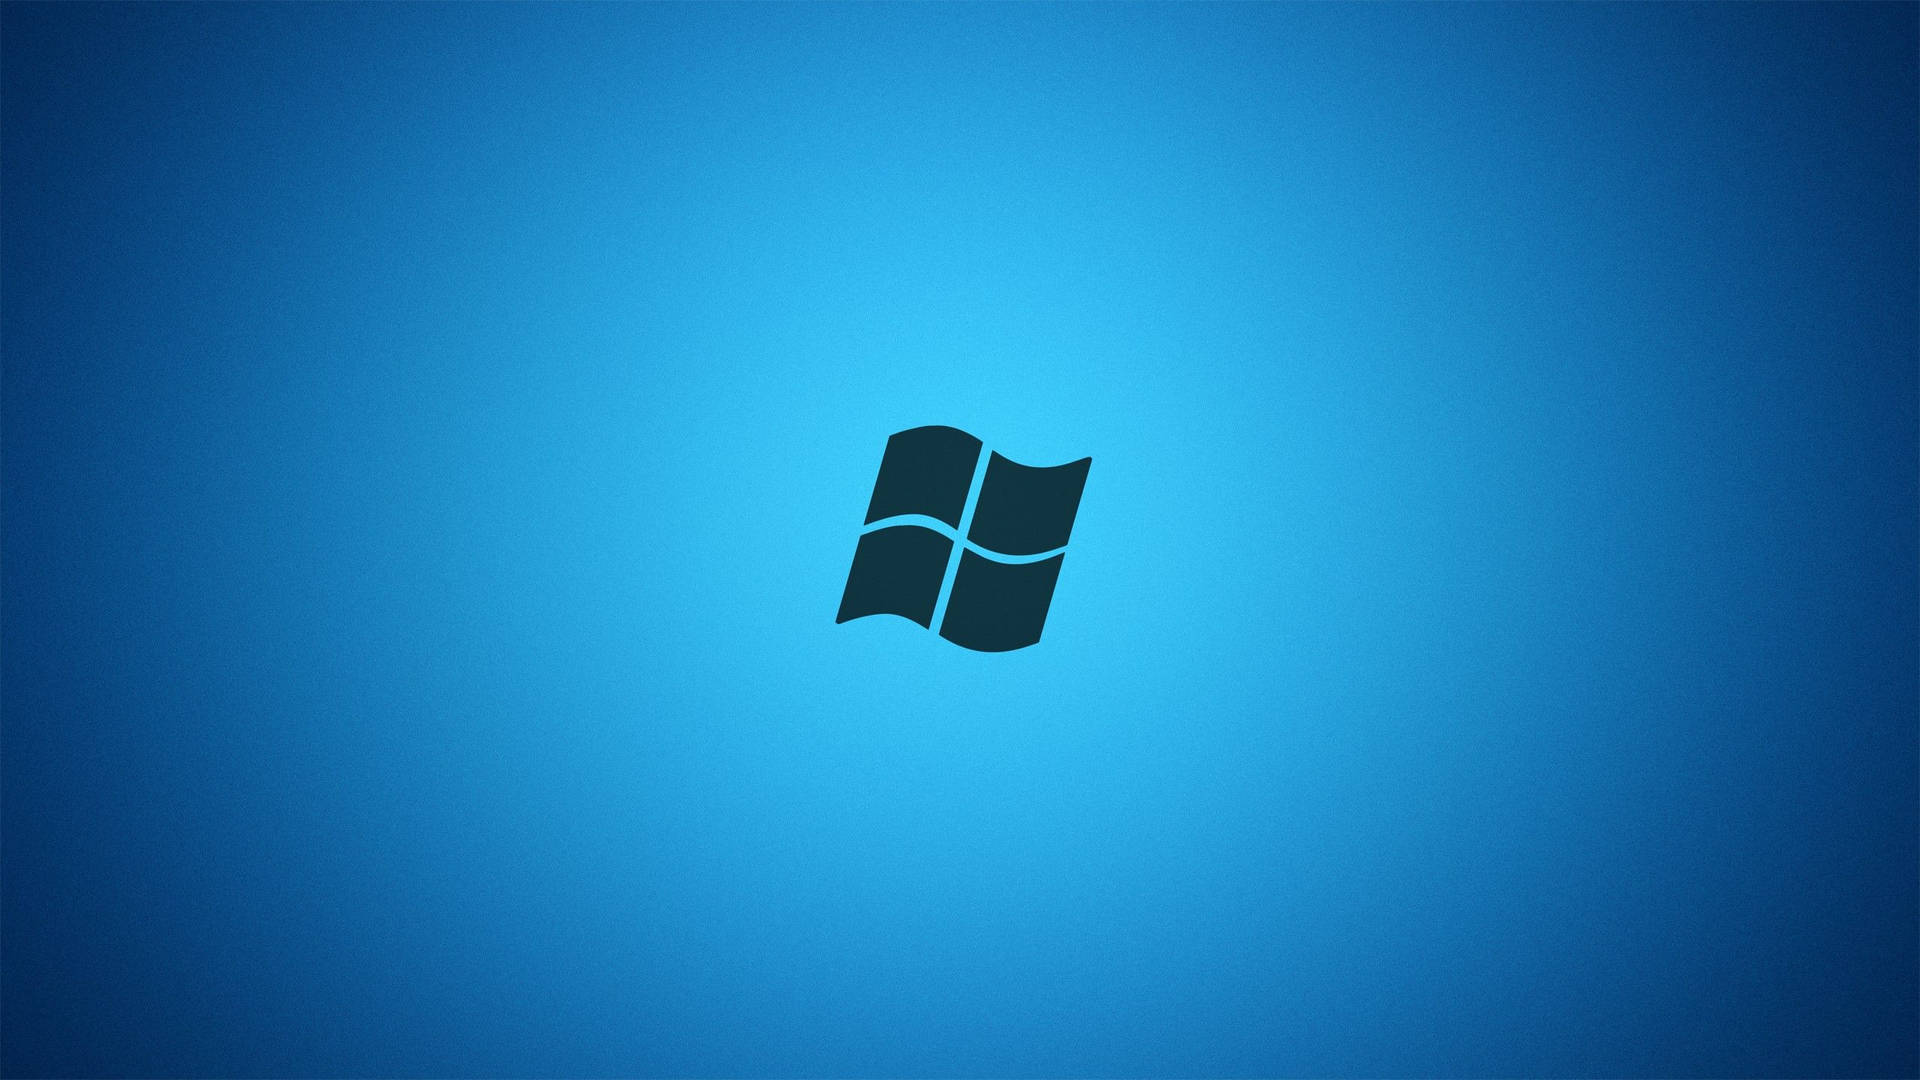 Windows 2560X1440 Wallpaper and Background Image